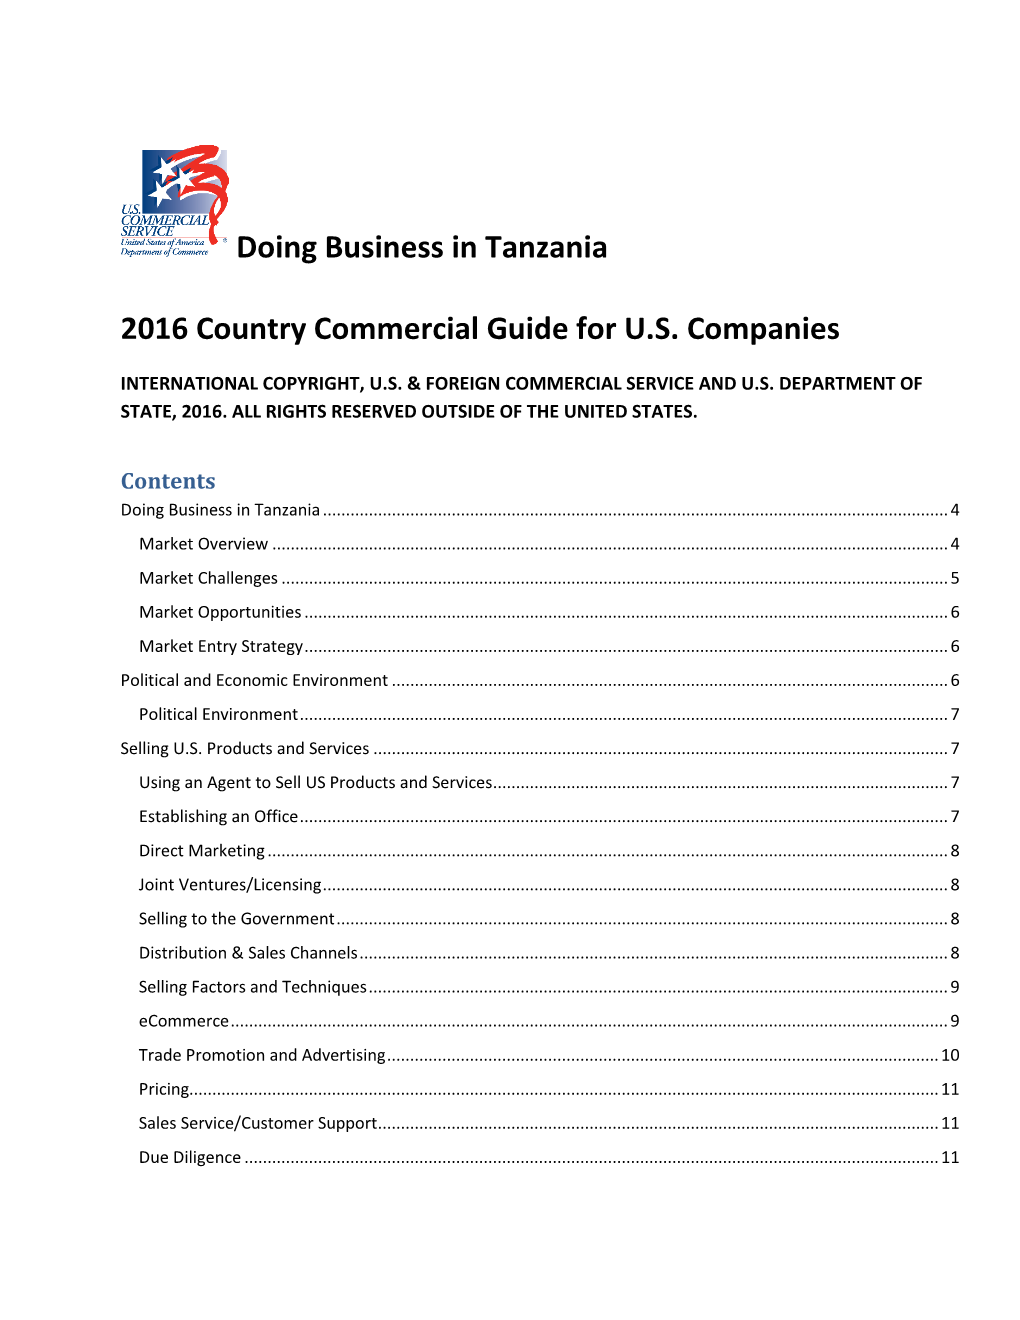 Doing Business in Tanzania 2016 Country Commercial Guide for U.S. Companies